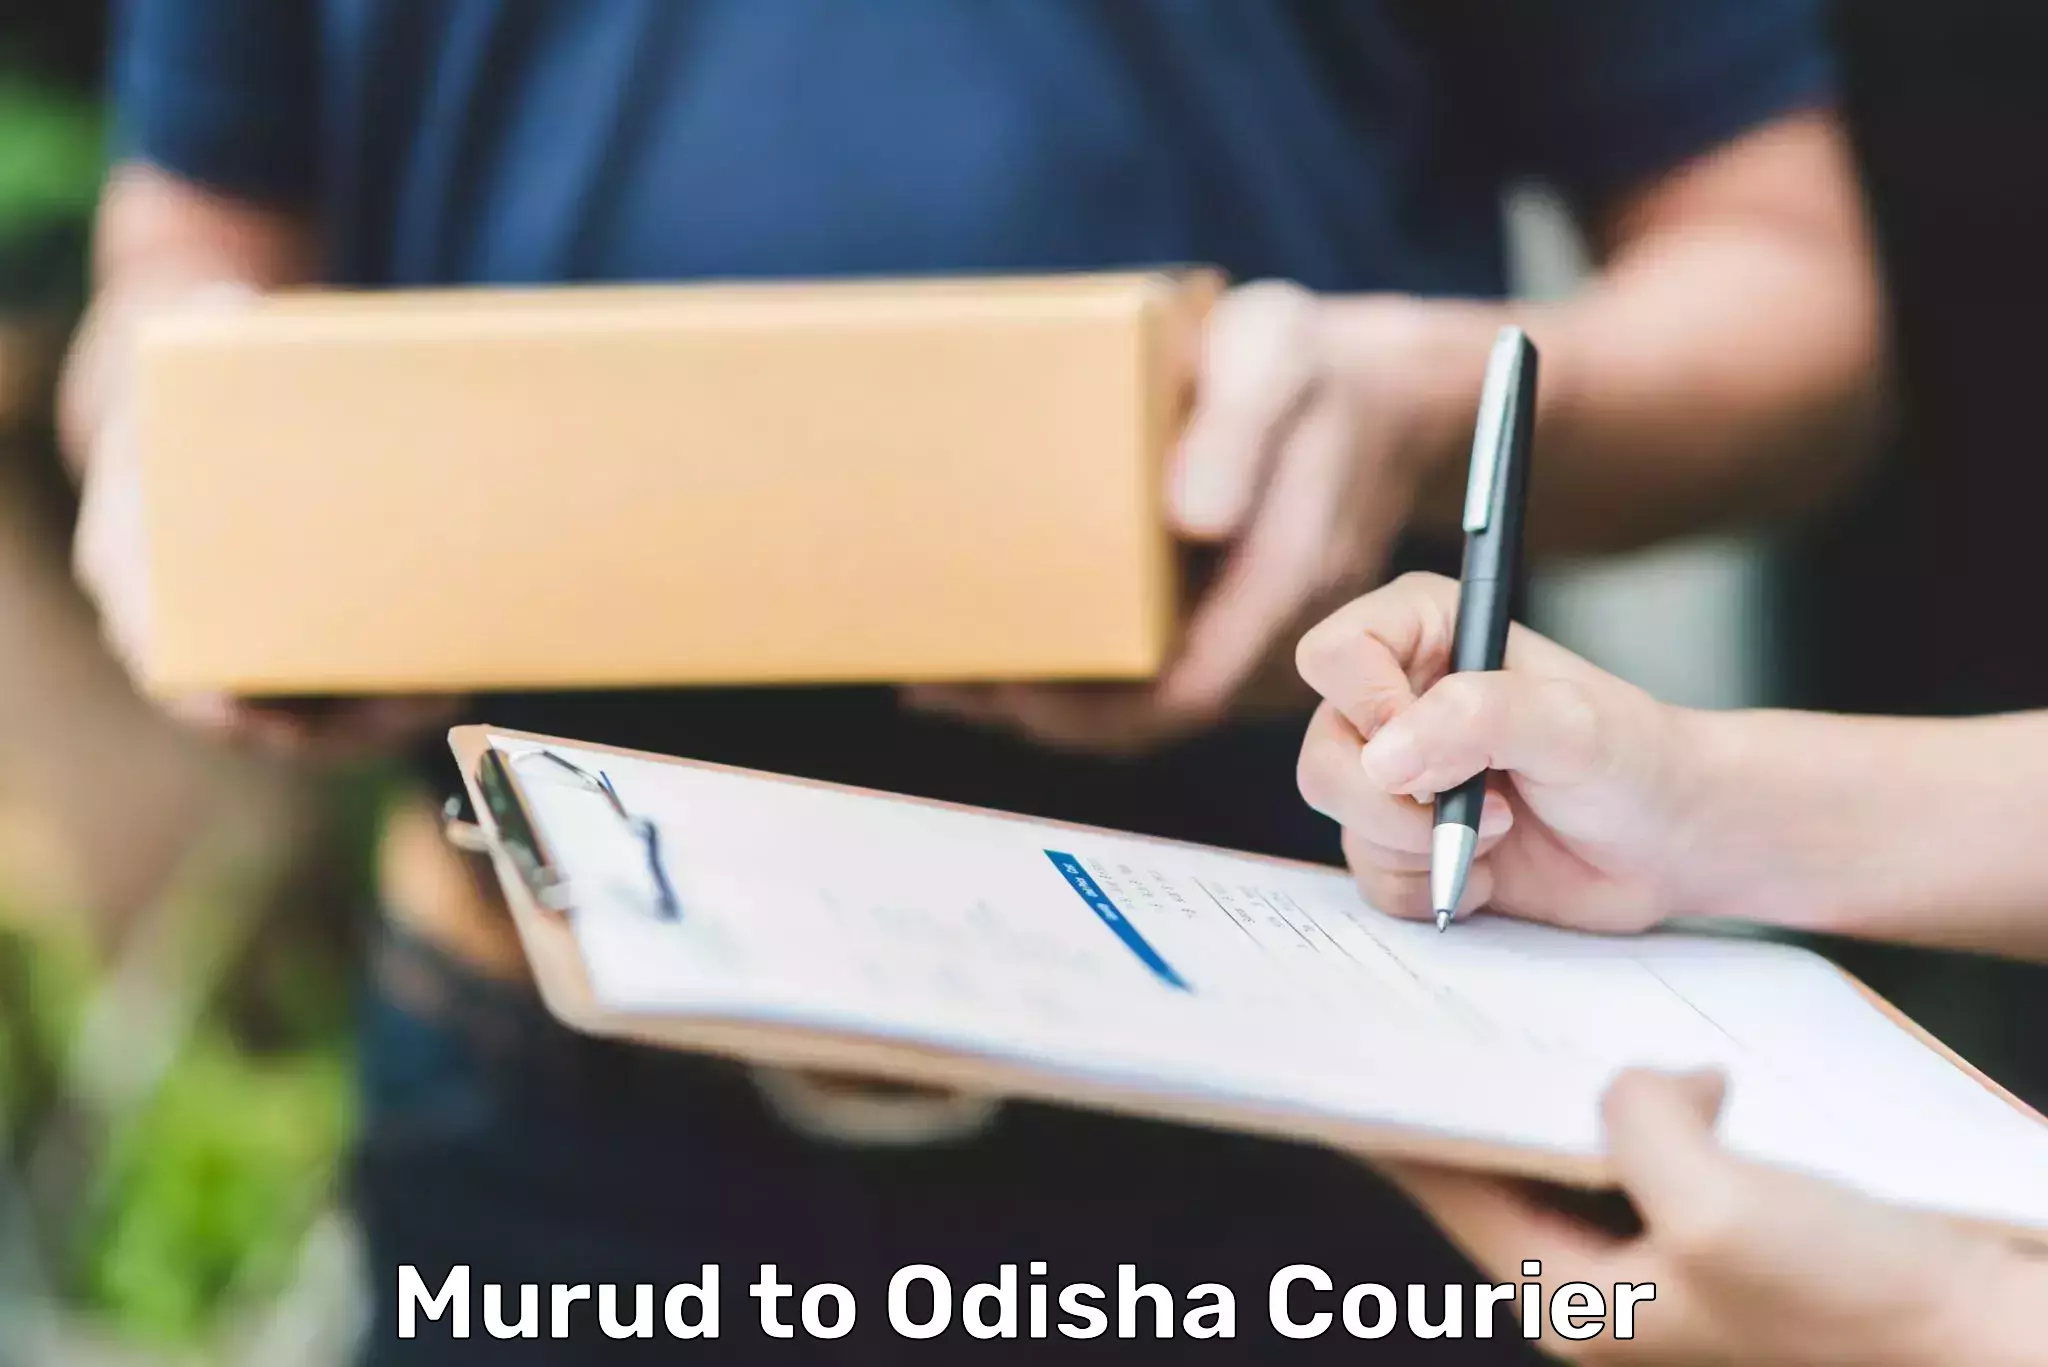 State-of-the-art courier technology Murud to Umerkote